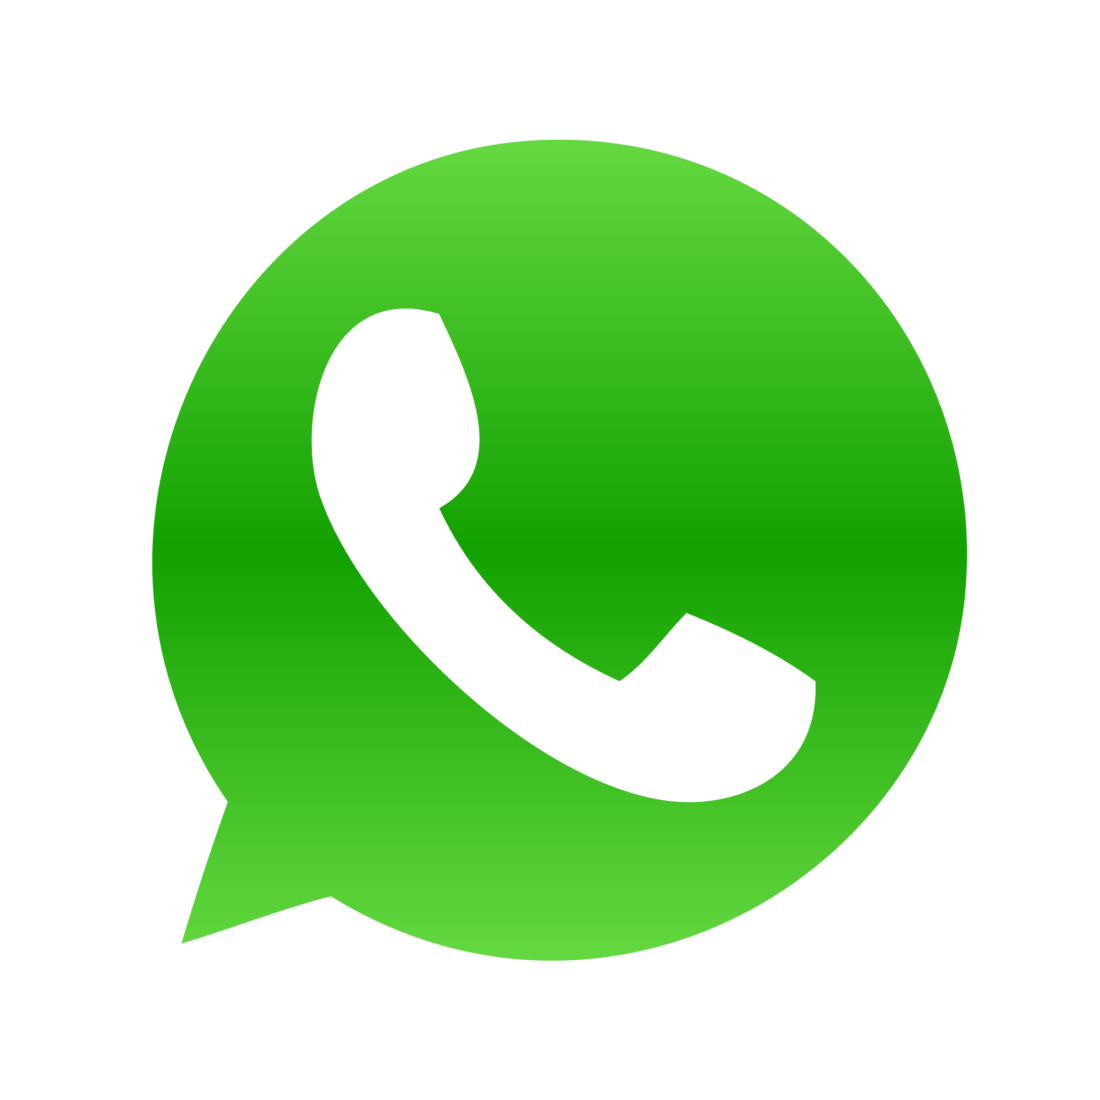 Download Logo Whatsapp Computer Icons Free Transparent Image HD HQ PNG